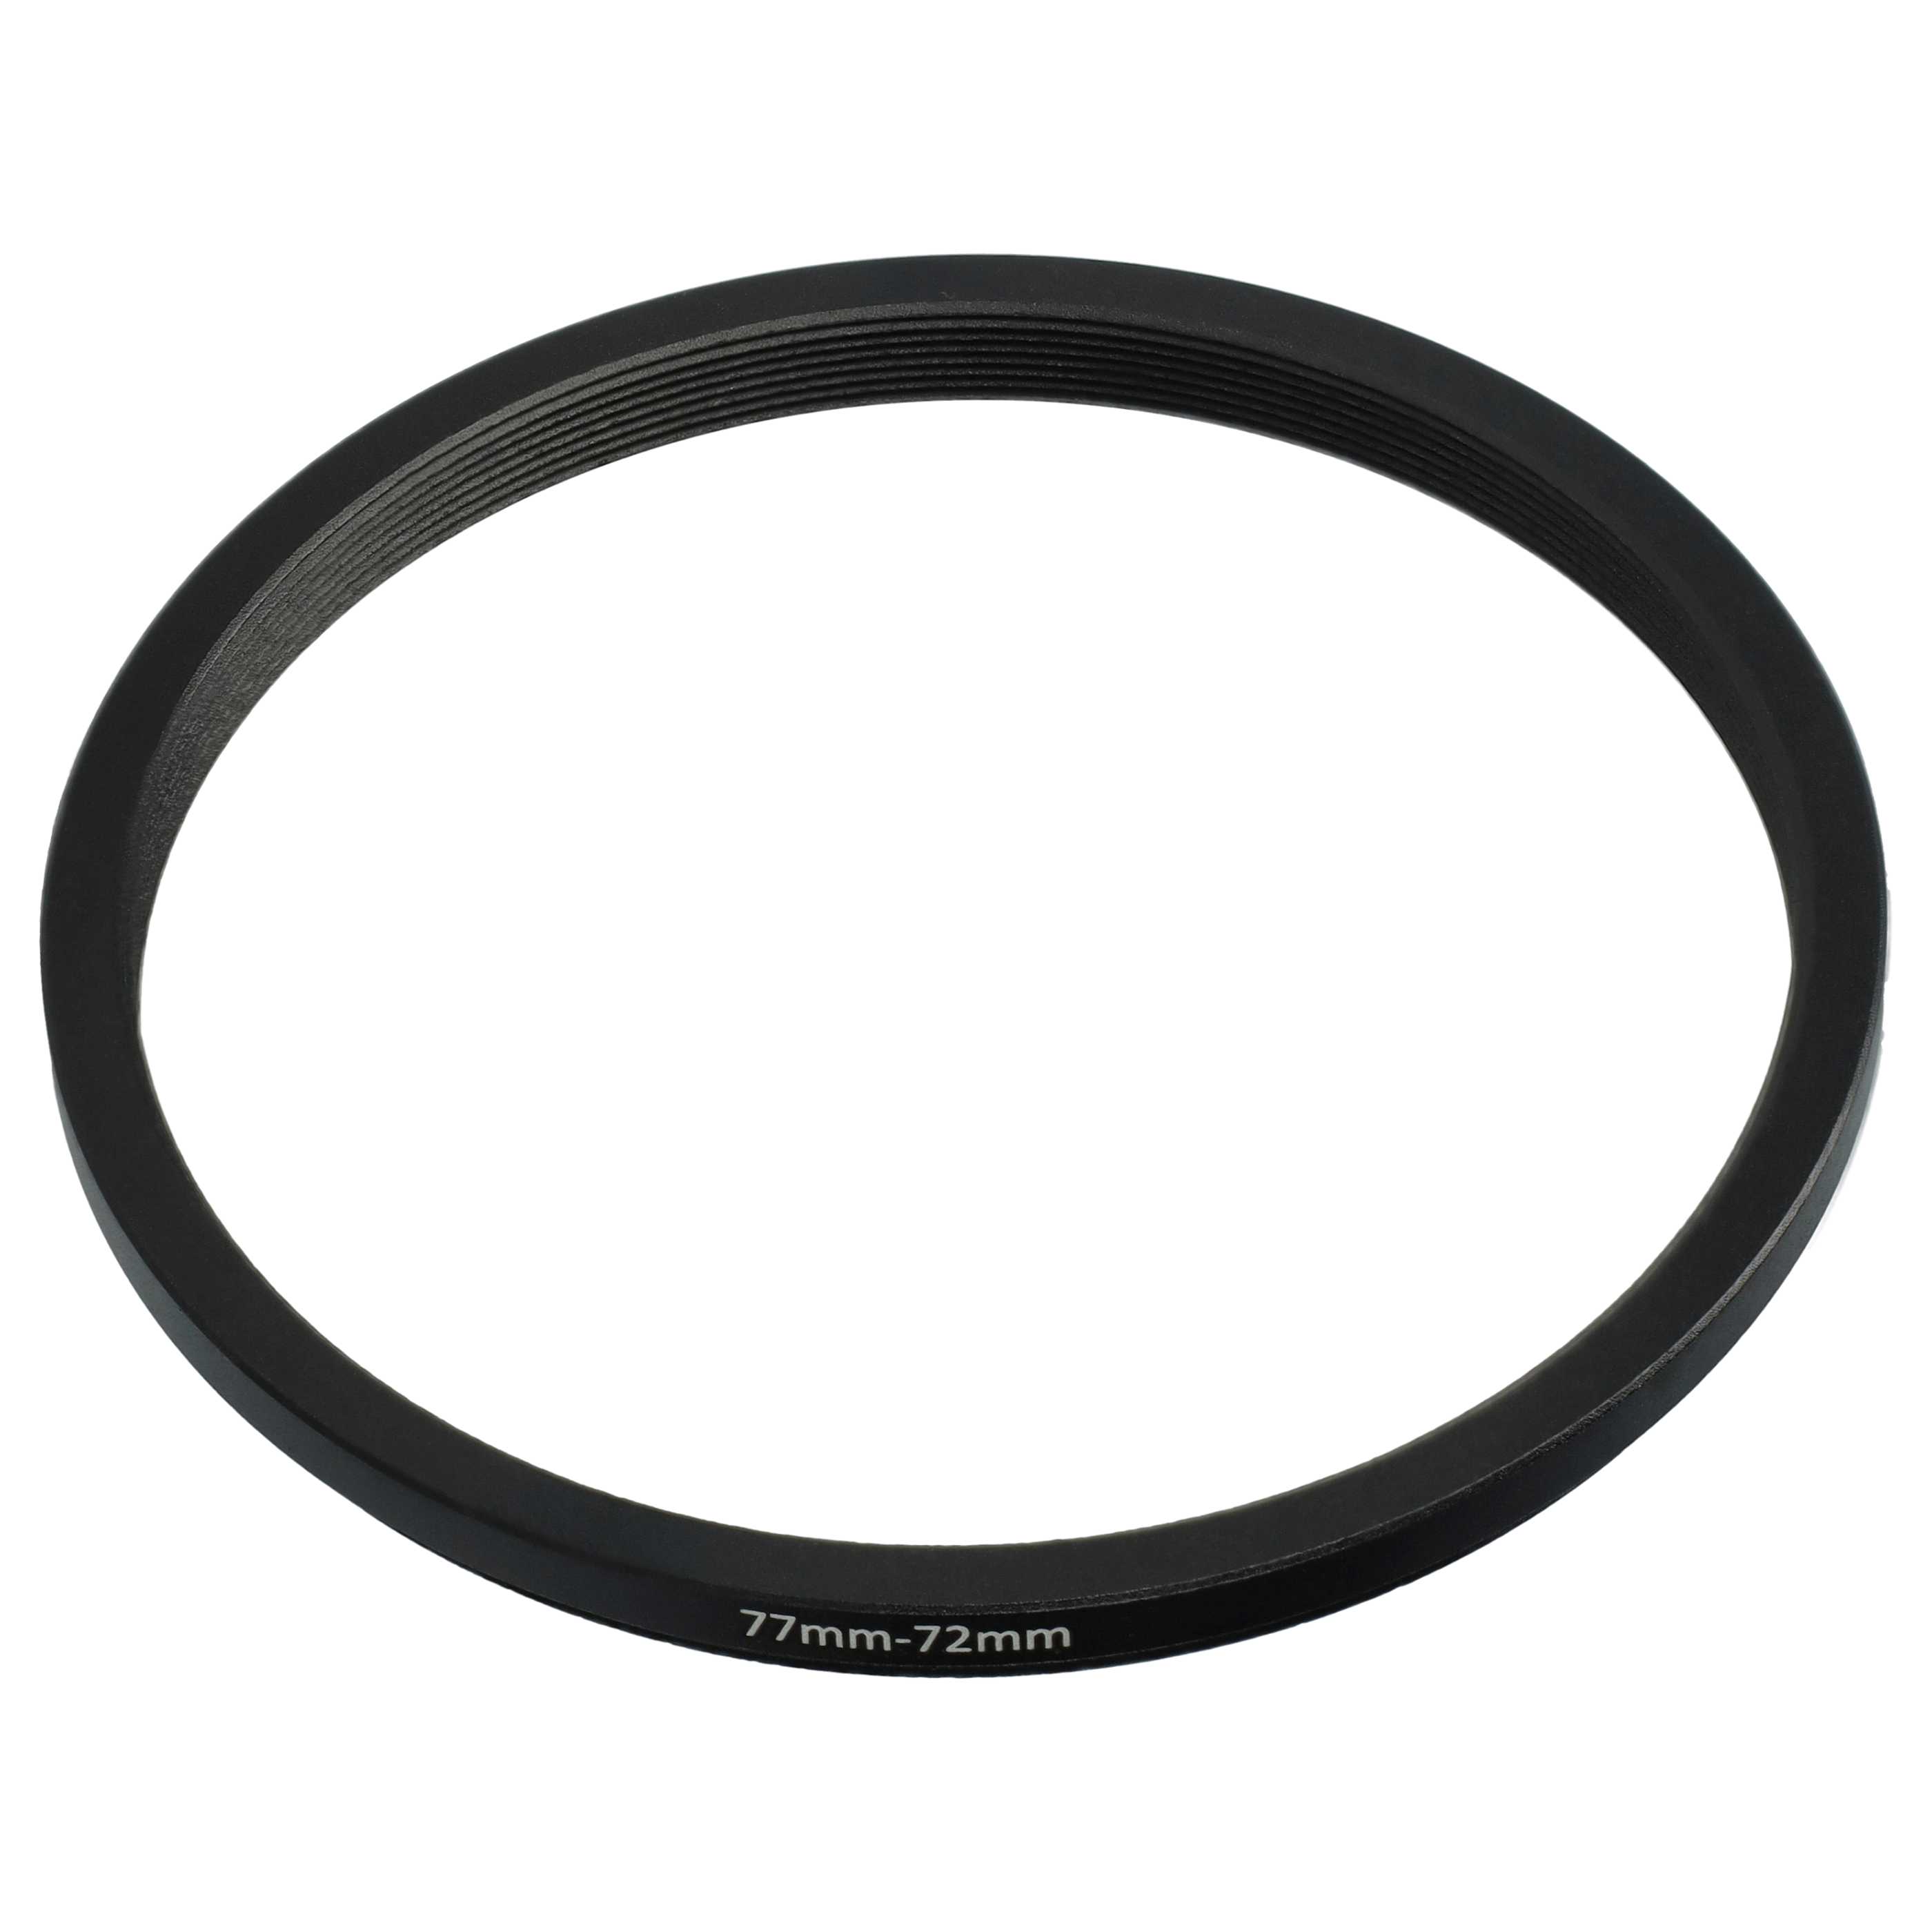 Step-Down Ring Adapter from 77 mm to 72 mm suitable for Camera Lens - Filter Adapter, metal